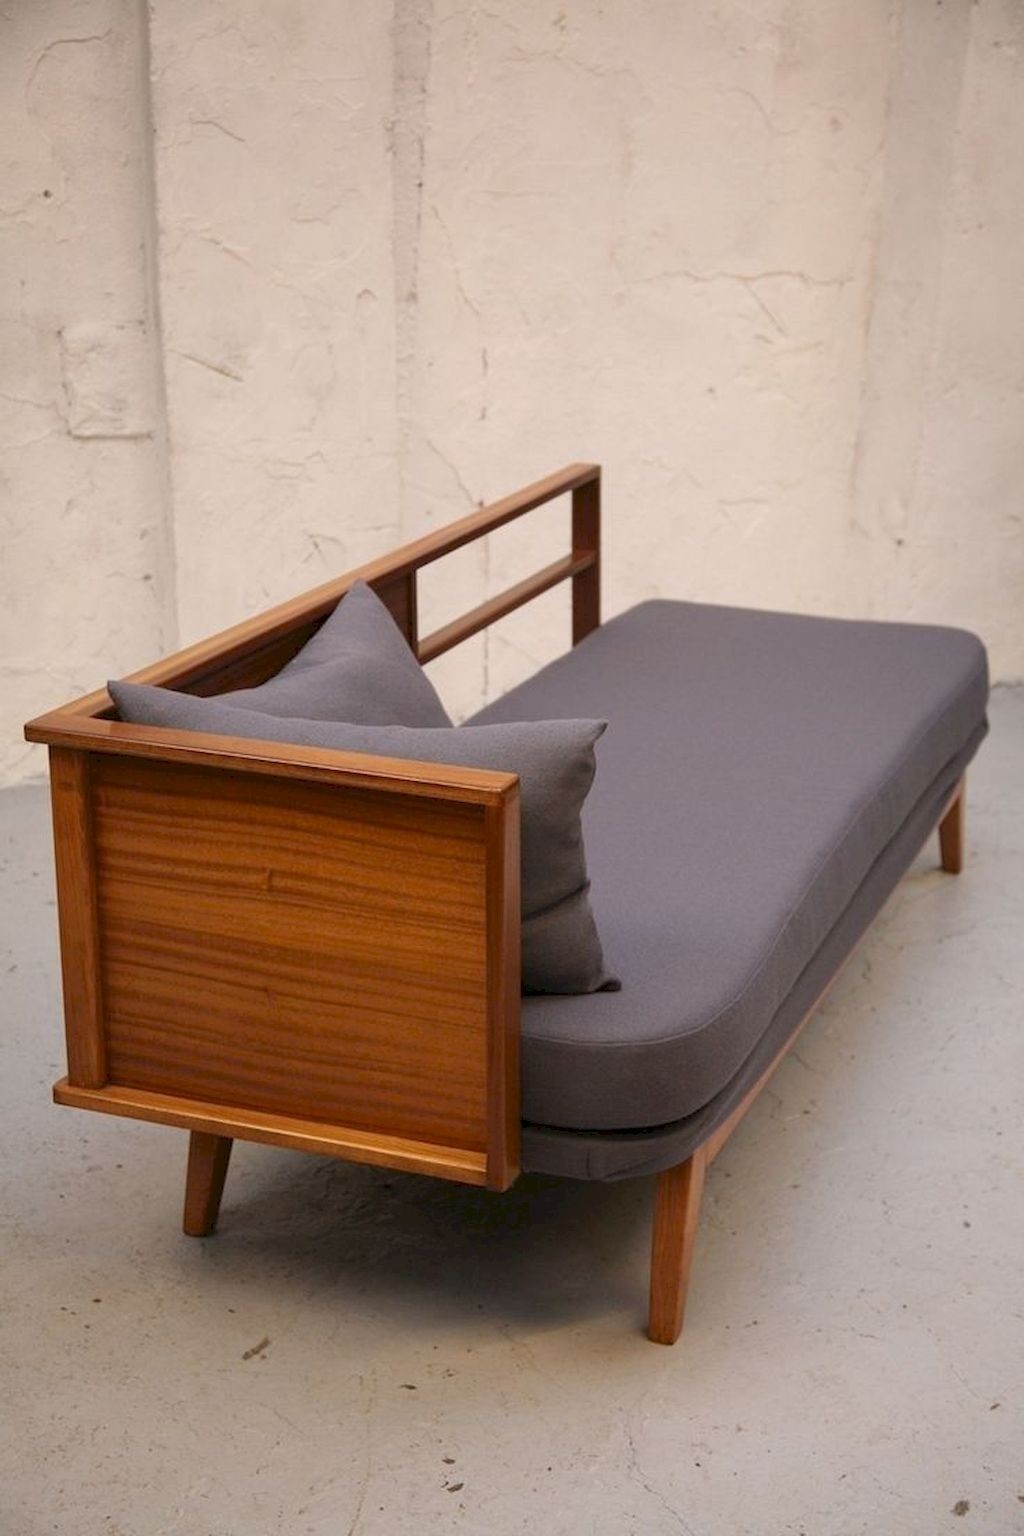 How to make a daybed